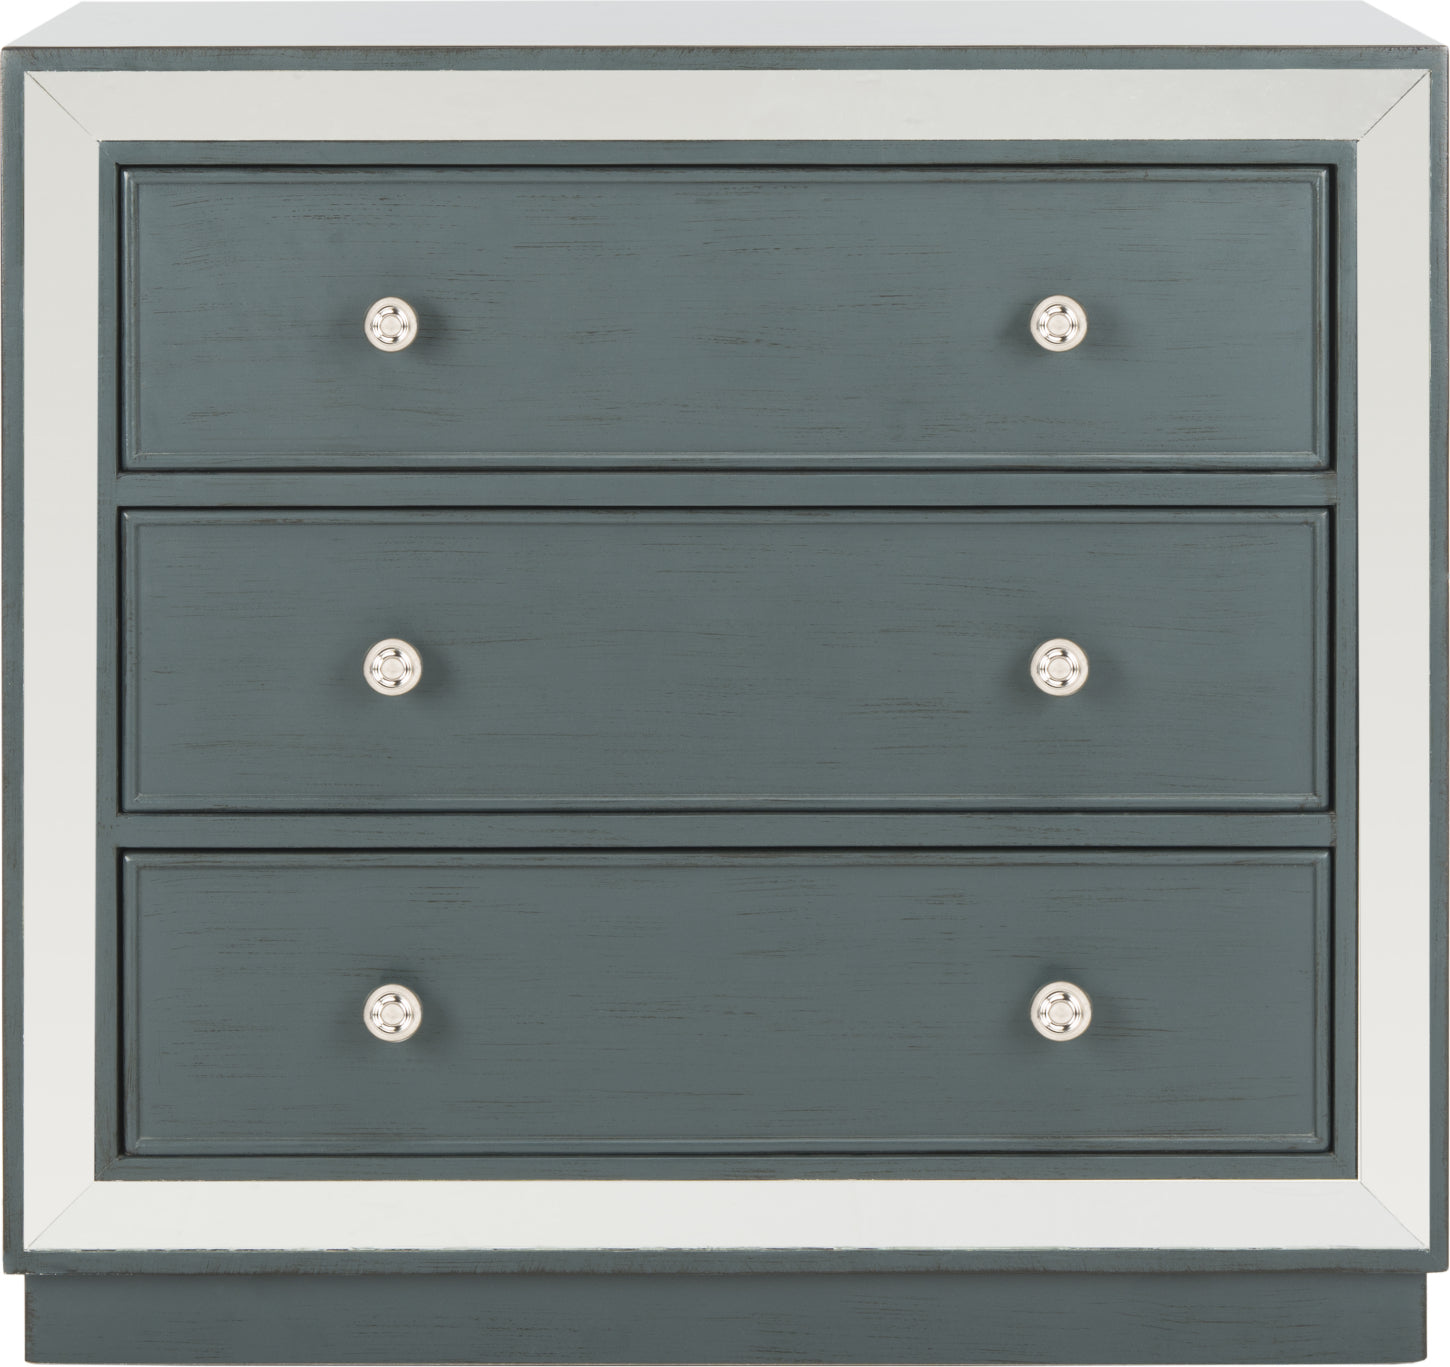 Safavieh Silas 3 Drawer Chest Steel Teal and Nickel Mirror Furniture main image